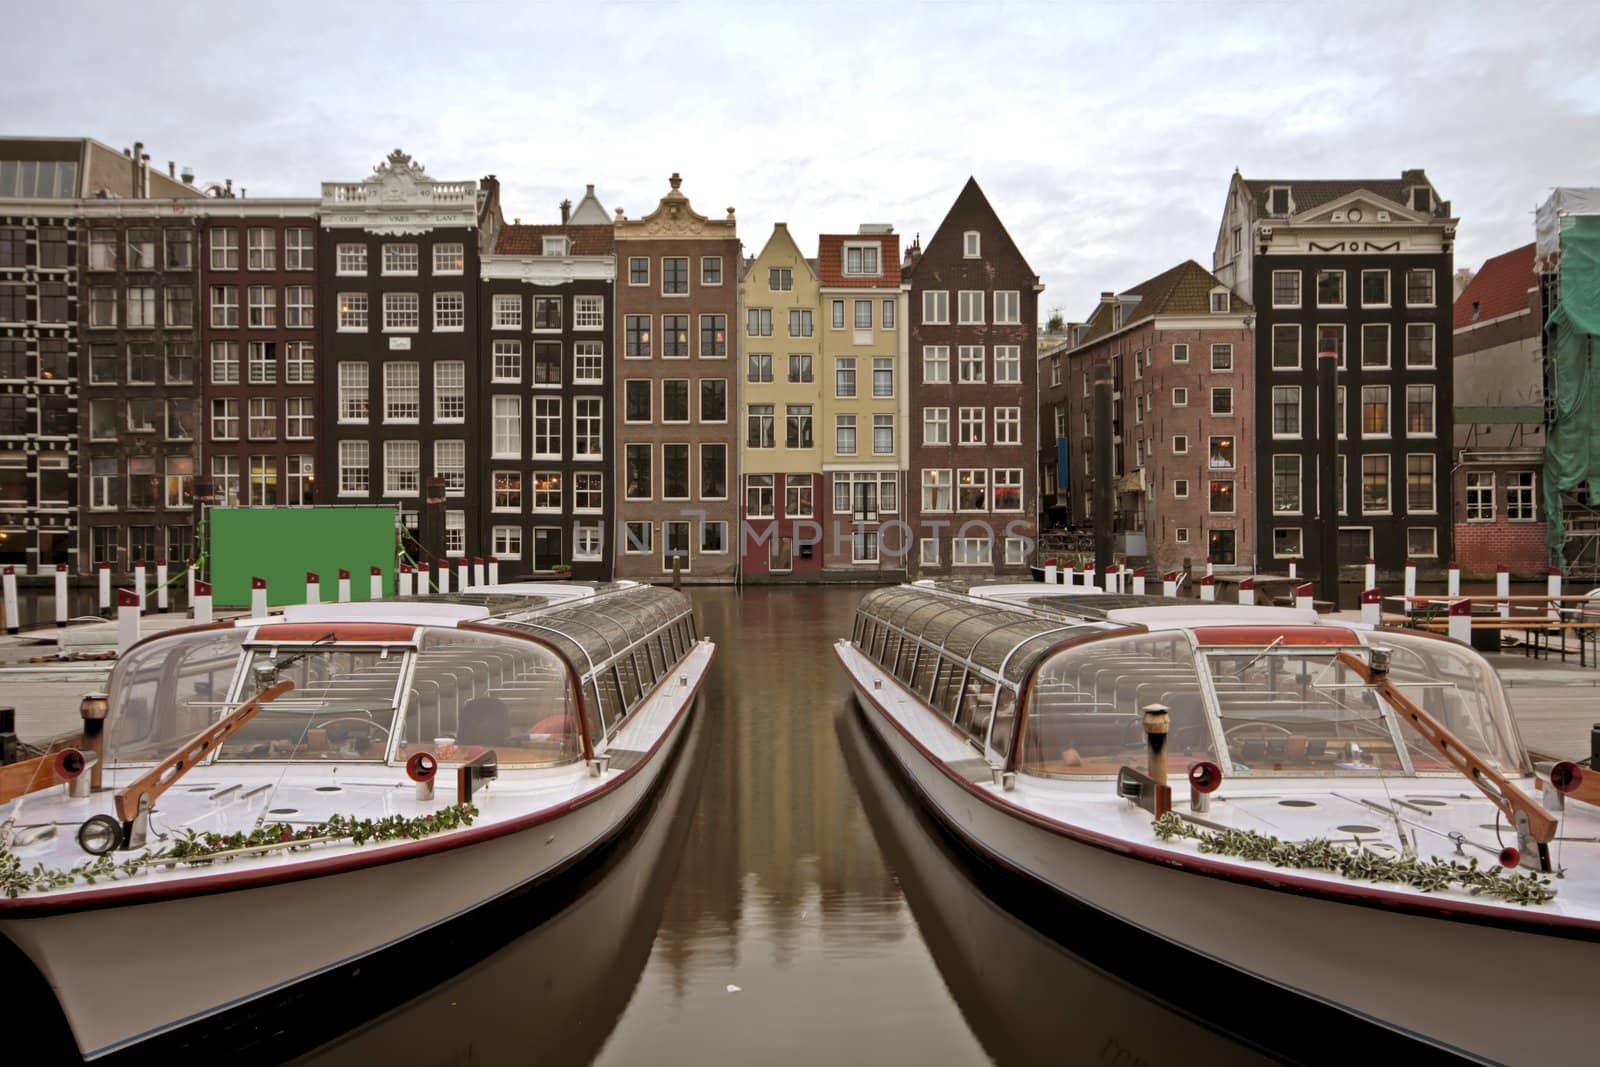 Amsterdam houses and cruise boats in the Netherlands

